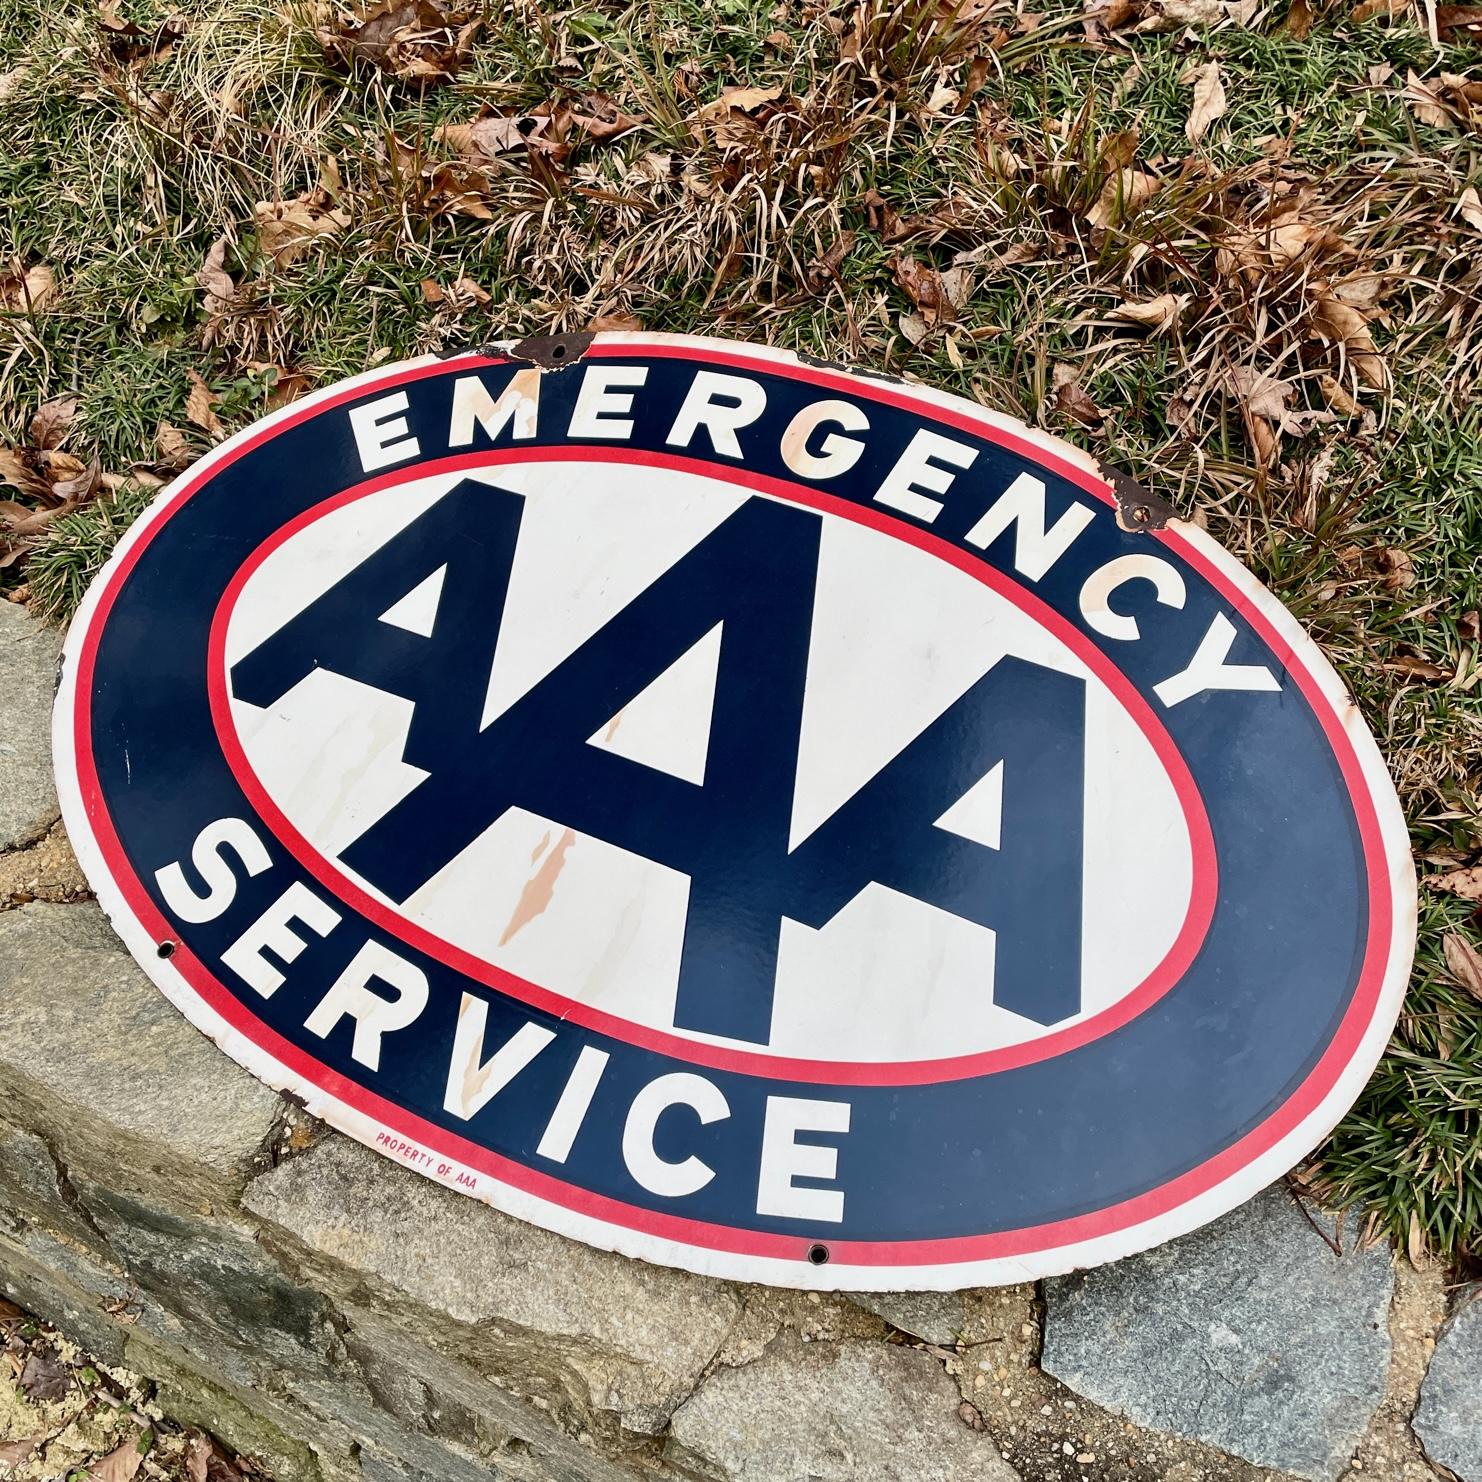 1950s AAA Emergency Service double-sided porcelain garage sign. Distressed condition, meaning some chips from being install back in the day, exposure to the elements, this item was used as intended. So we would say age appropriate wear, and some